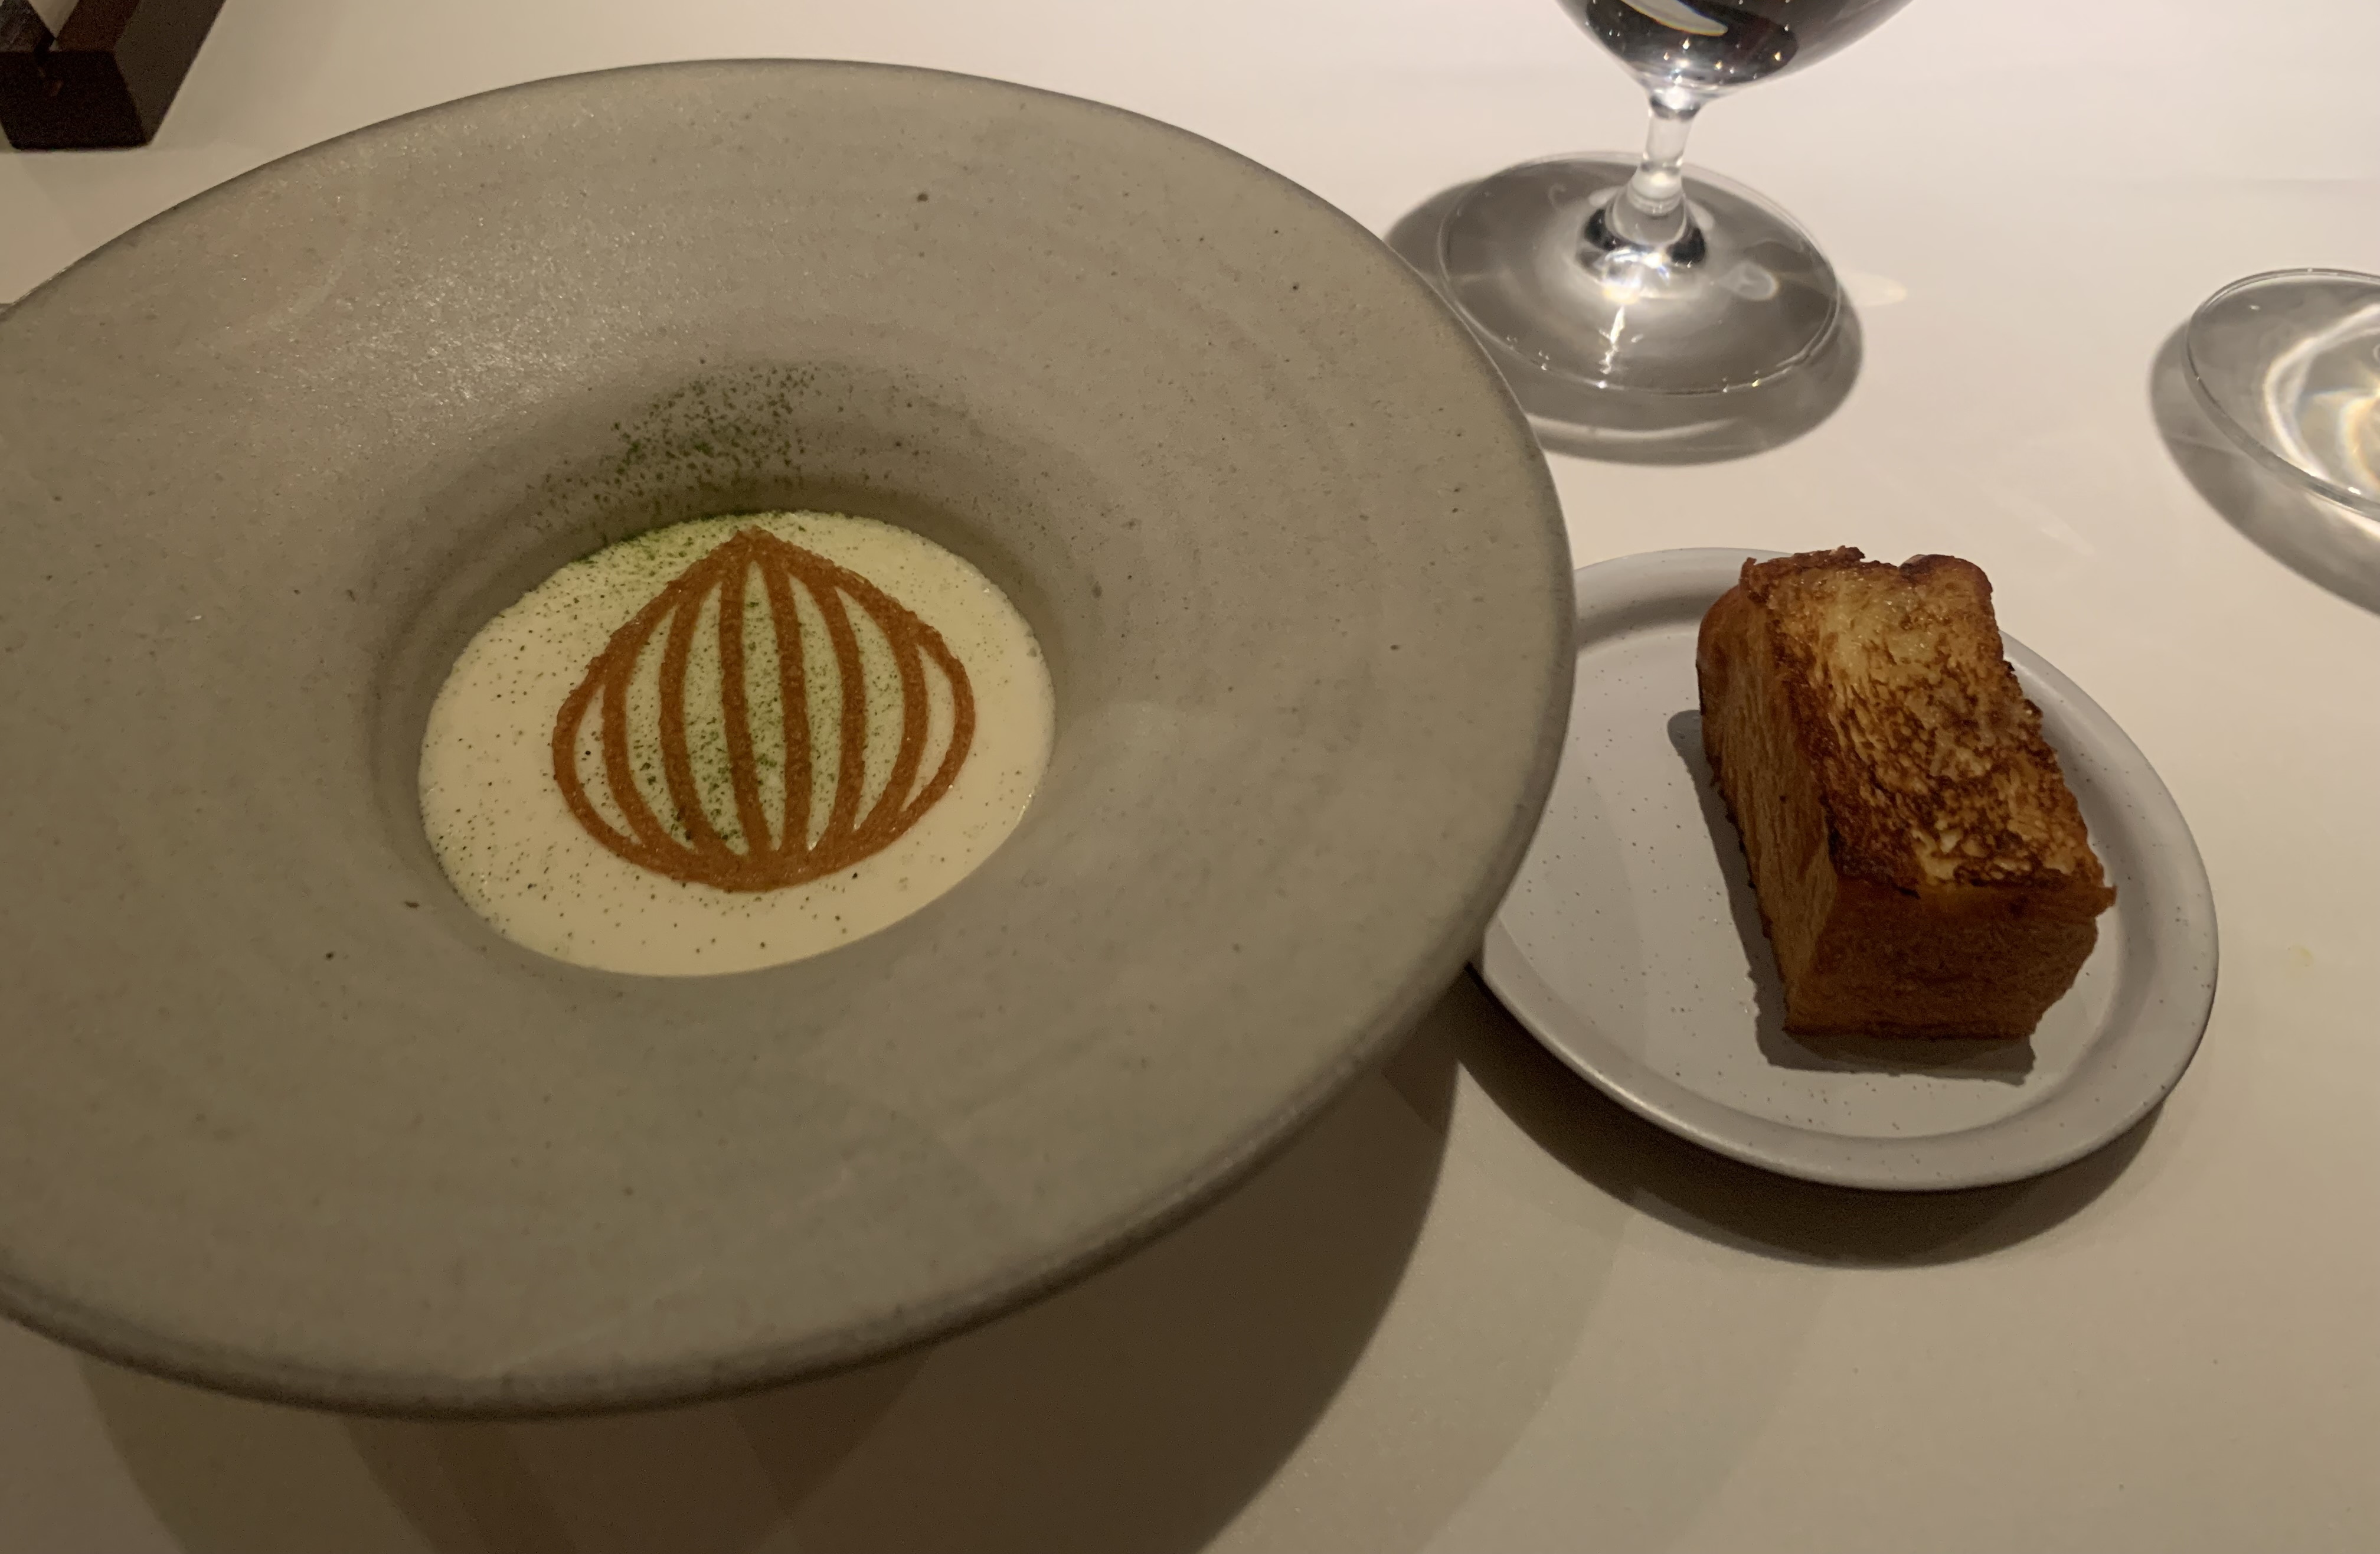 Bowl of white foam with a delicate, dark-brown tuile cookie in the shape of an onion sitting on top, dusted lightly with a green powder. Next to it is a golden-brown toasted hunk of buttery brioche bread.